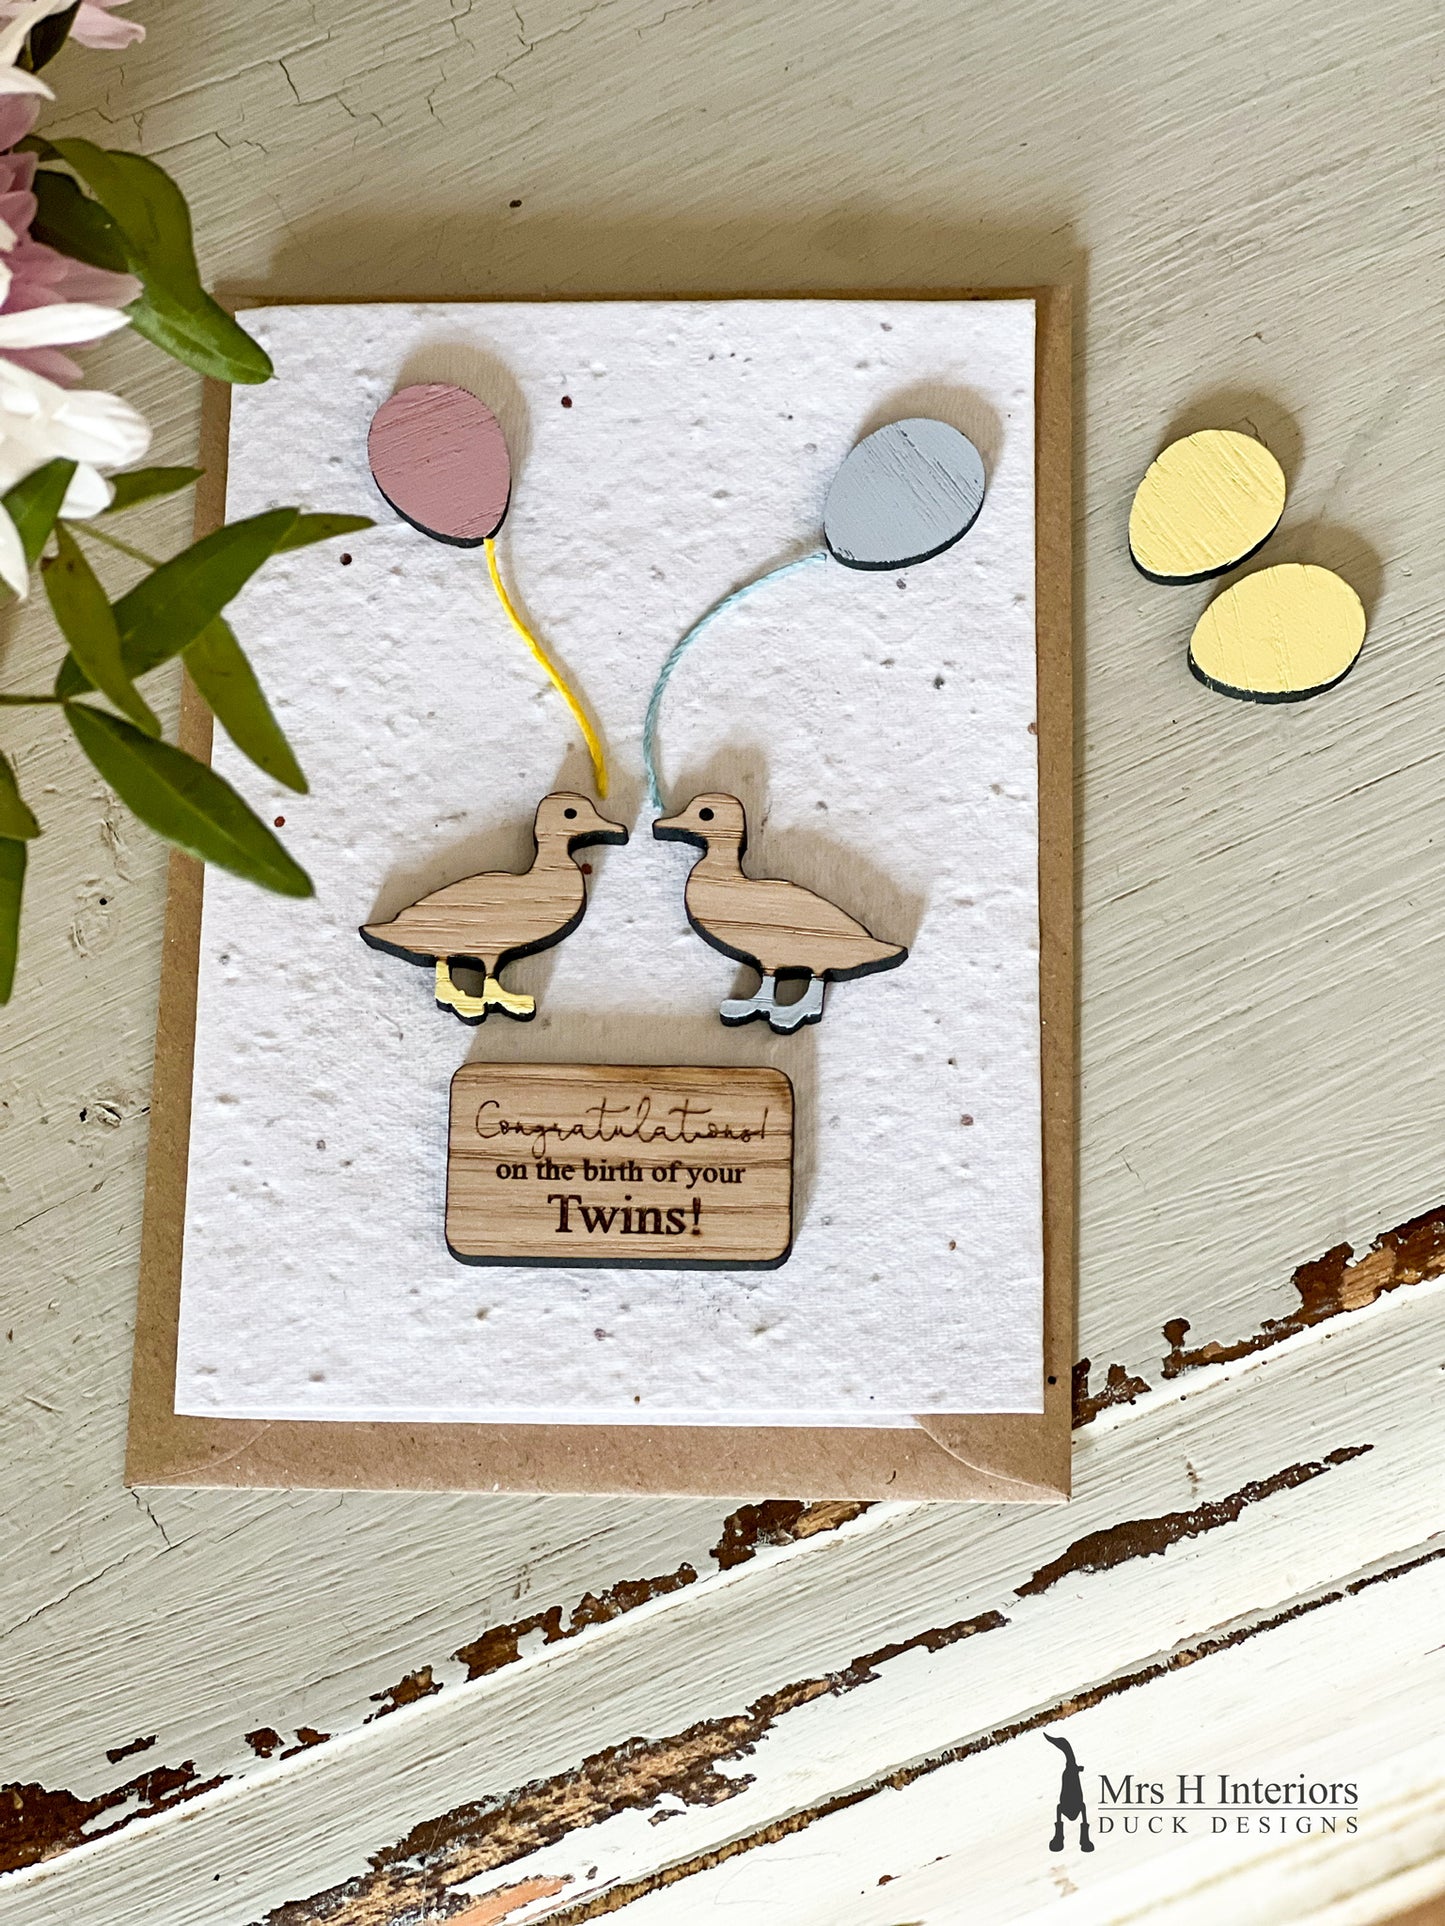 Congratulations New Baby Twins Card - Ducklings & Balloons - Greetings Card - Decorated Wooden Duck in Boots by Mrs H the Duck Lady